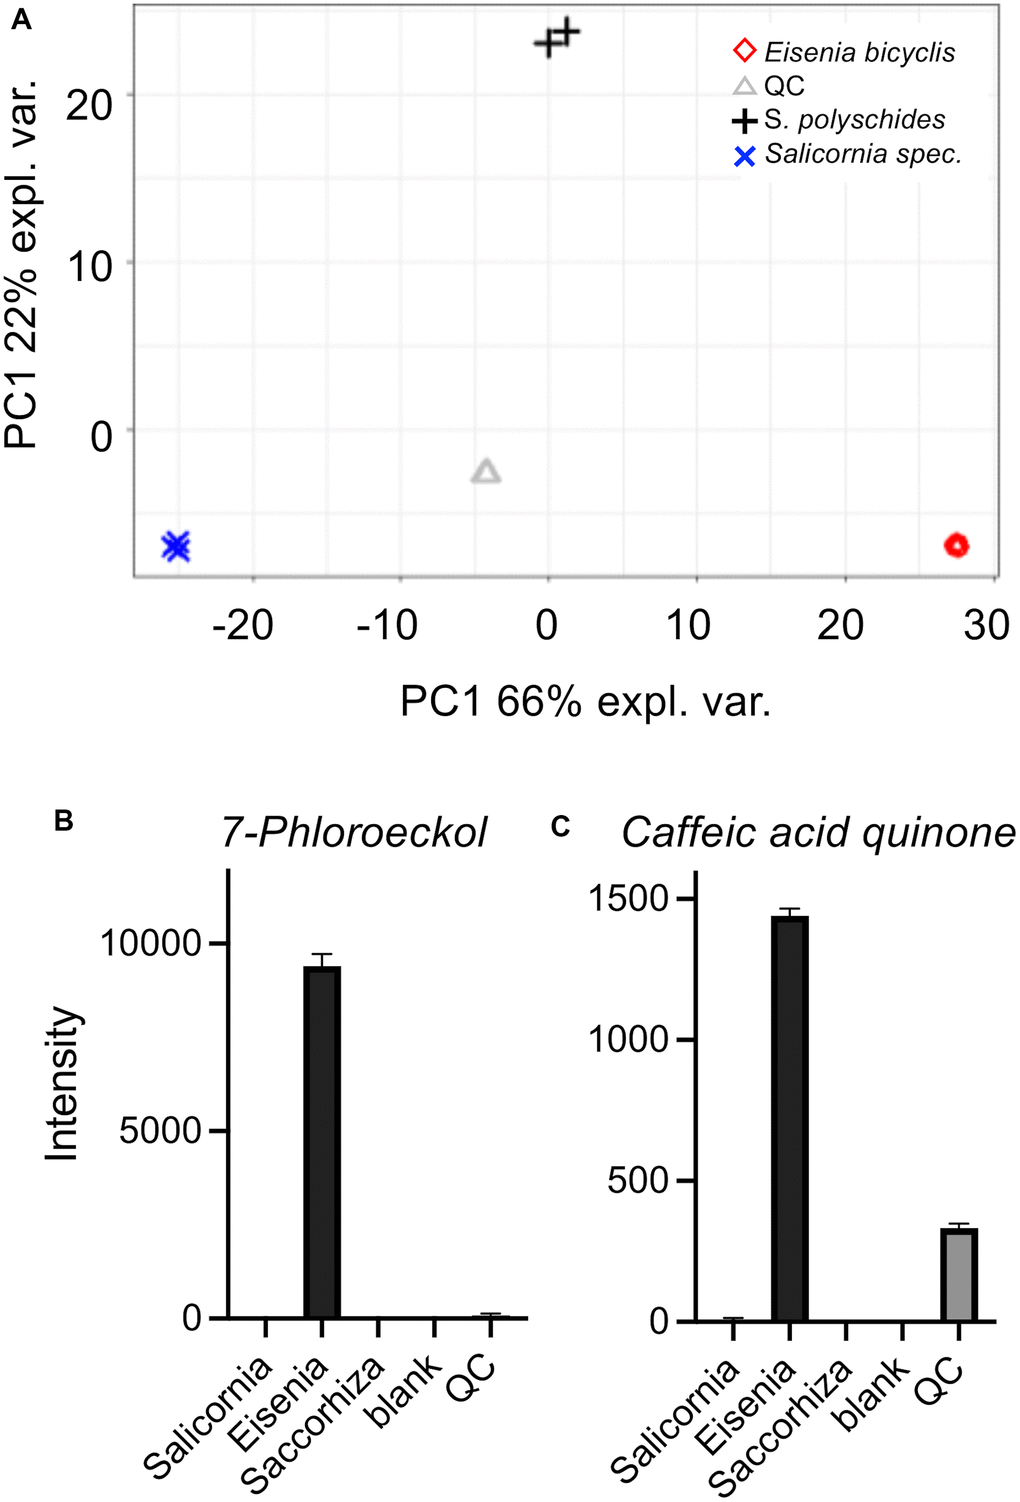 Untargeted HPLC-MS analysis of algae extracts. Principal component analysis (PCA) (A) of algae extracts measured using the ESI+ and ESI- acquisition mode. Underlying peak areas are log10 transformed and pareto-scaled. (B, C) LC-ToF-MS intensities of 7-phloroeckol (B) and caffeic acid quinone (C). Intensities are displayed as the mean of triplicate injections (duplicate injections for Saccorhiza).